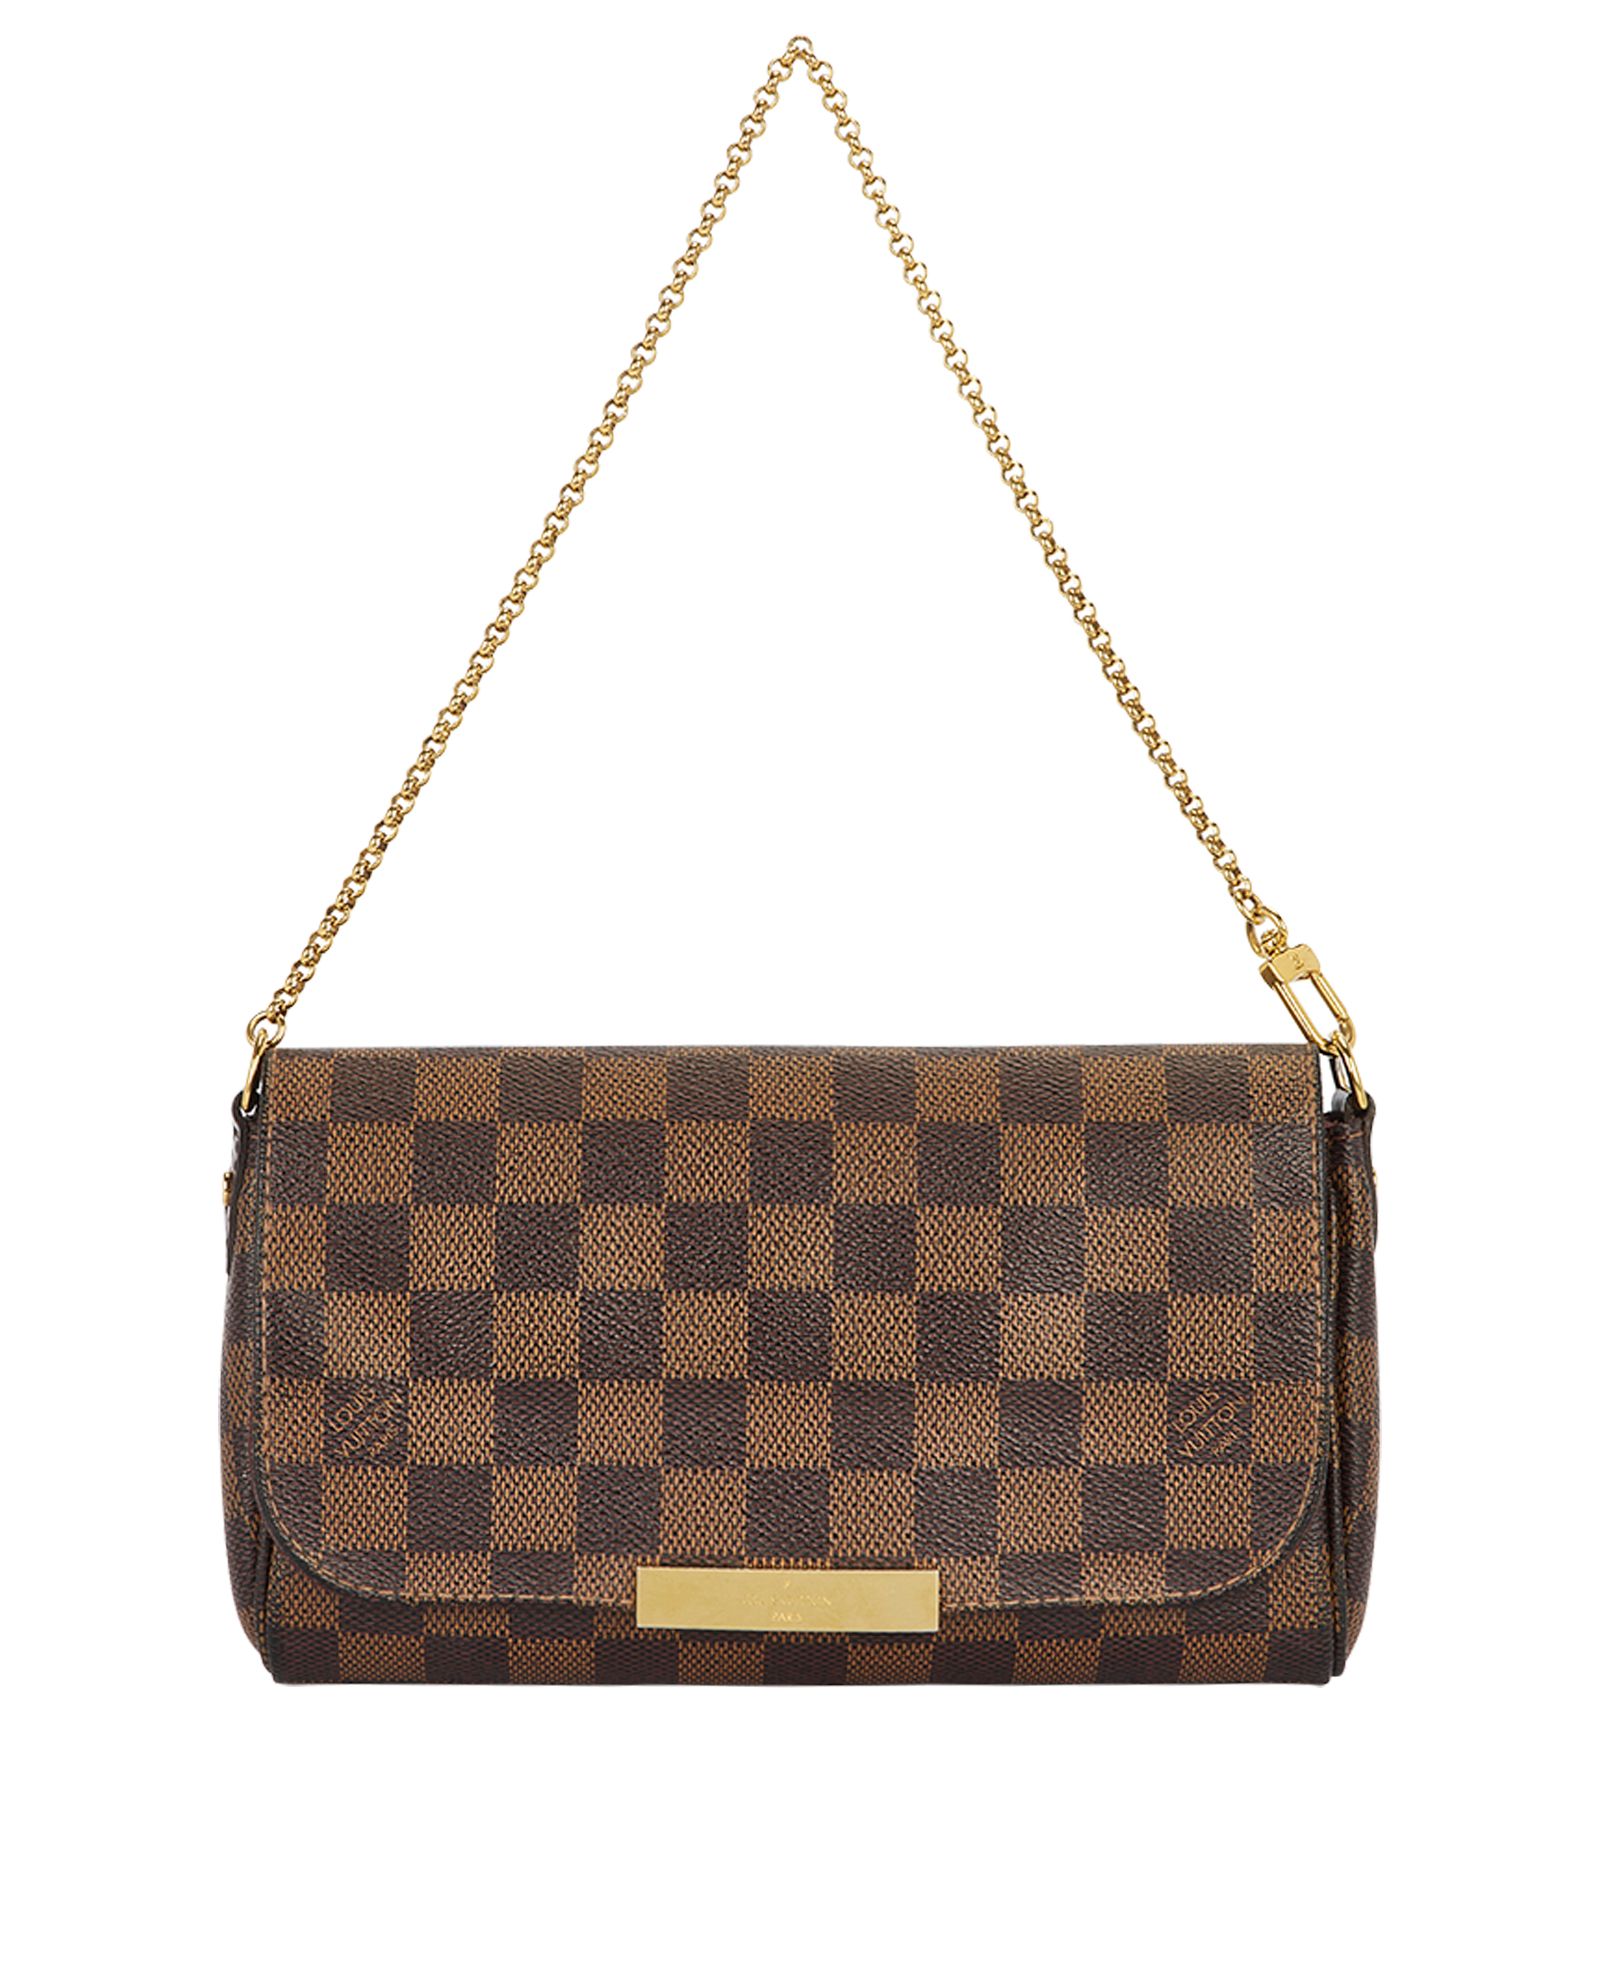 Designer Exchange Ltd - Louis Vuitton is in the second position of best  sellers at Designer Exchange. We have a big and stunning collection! Check  on our website. #louisvuitton #louisvuittonbags #louisvuittonlovers  #prelovedbag #